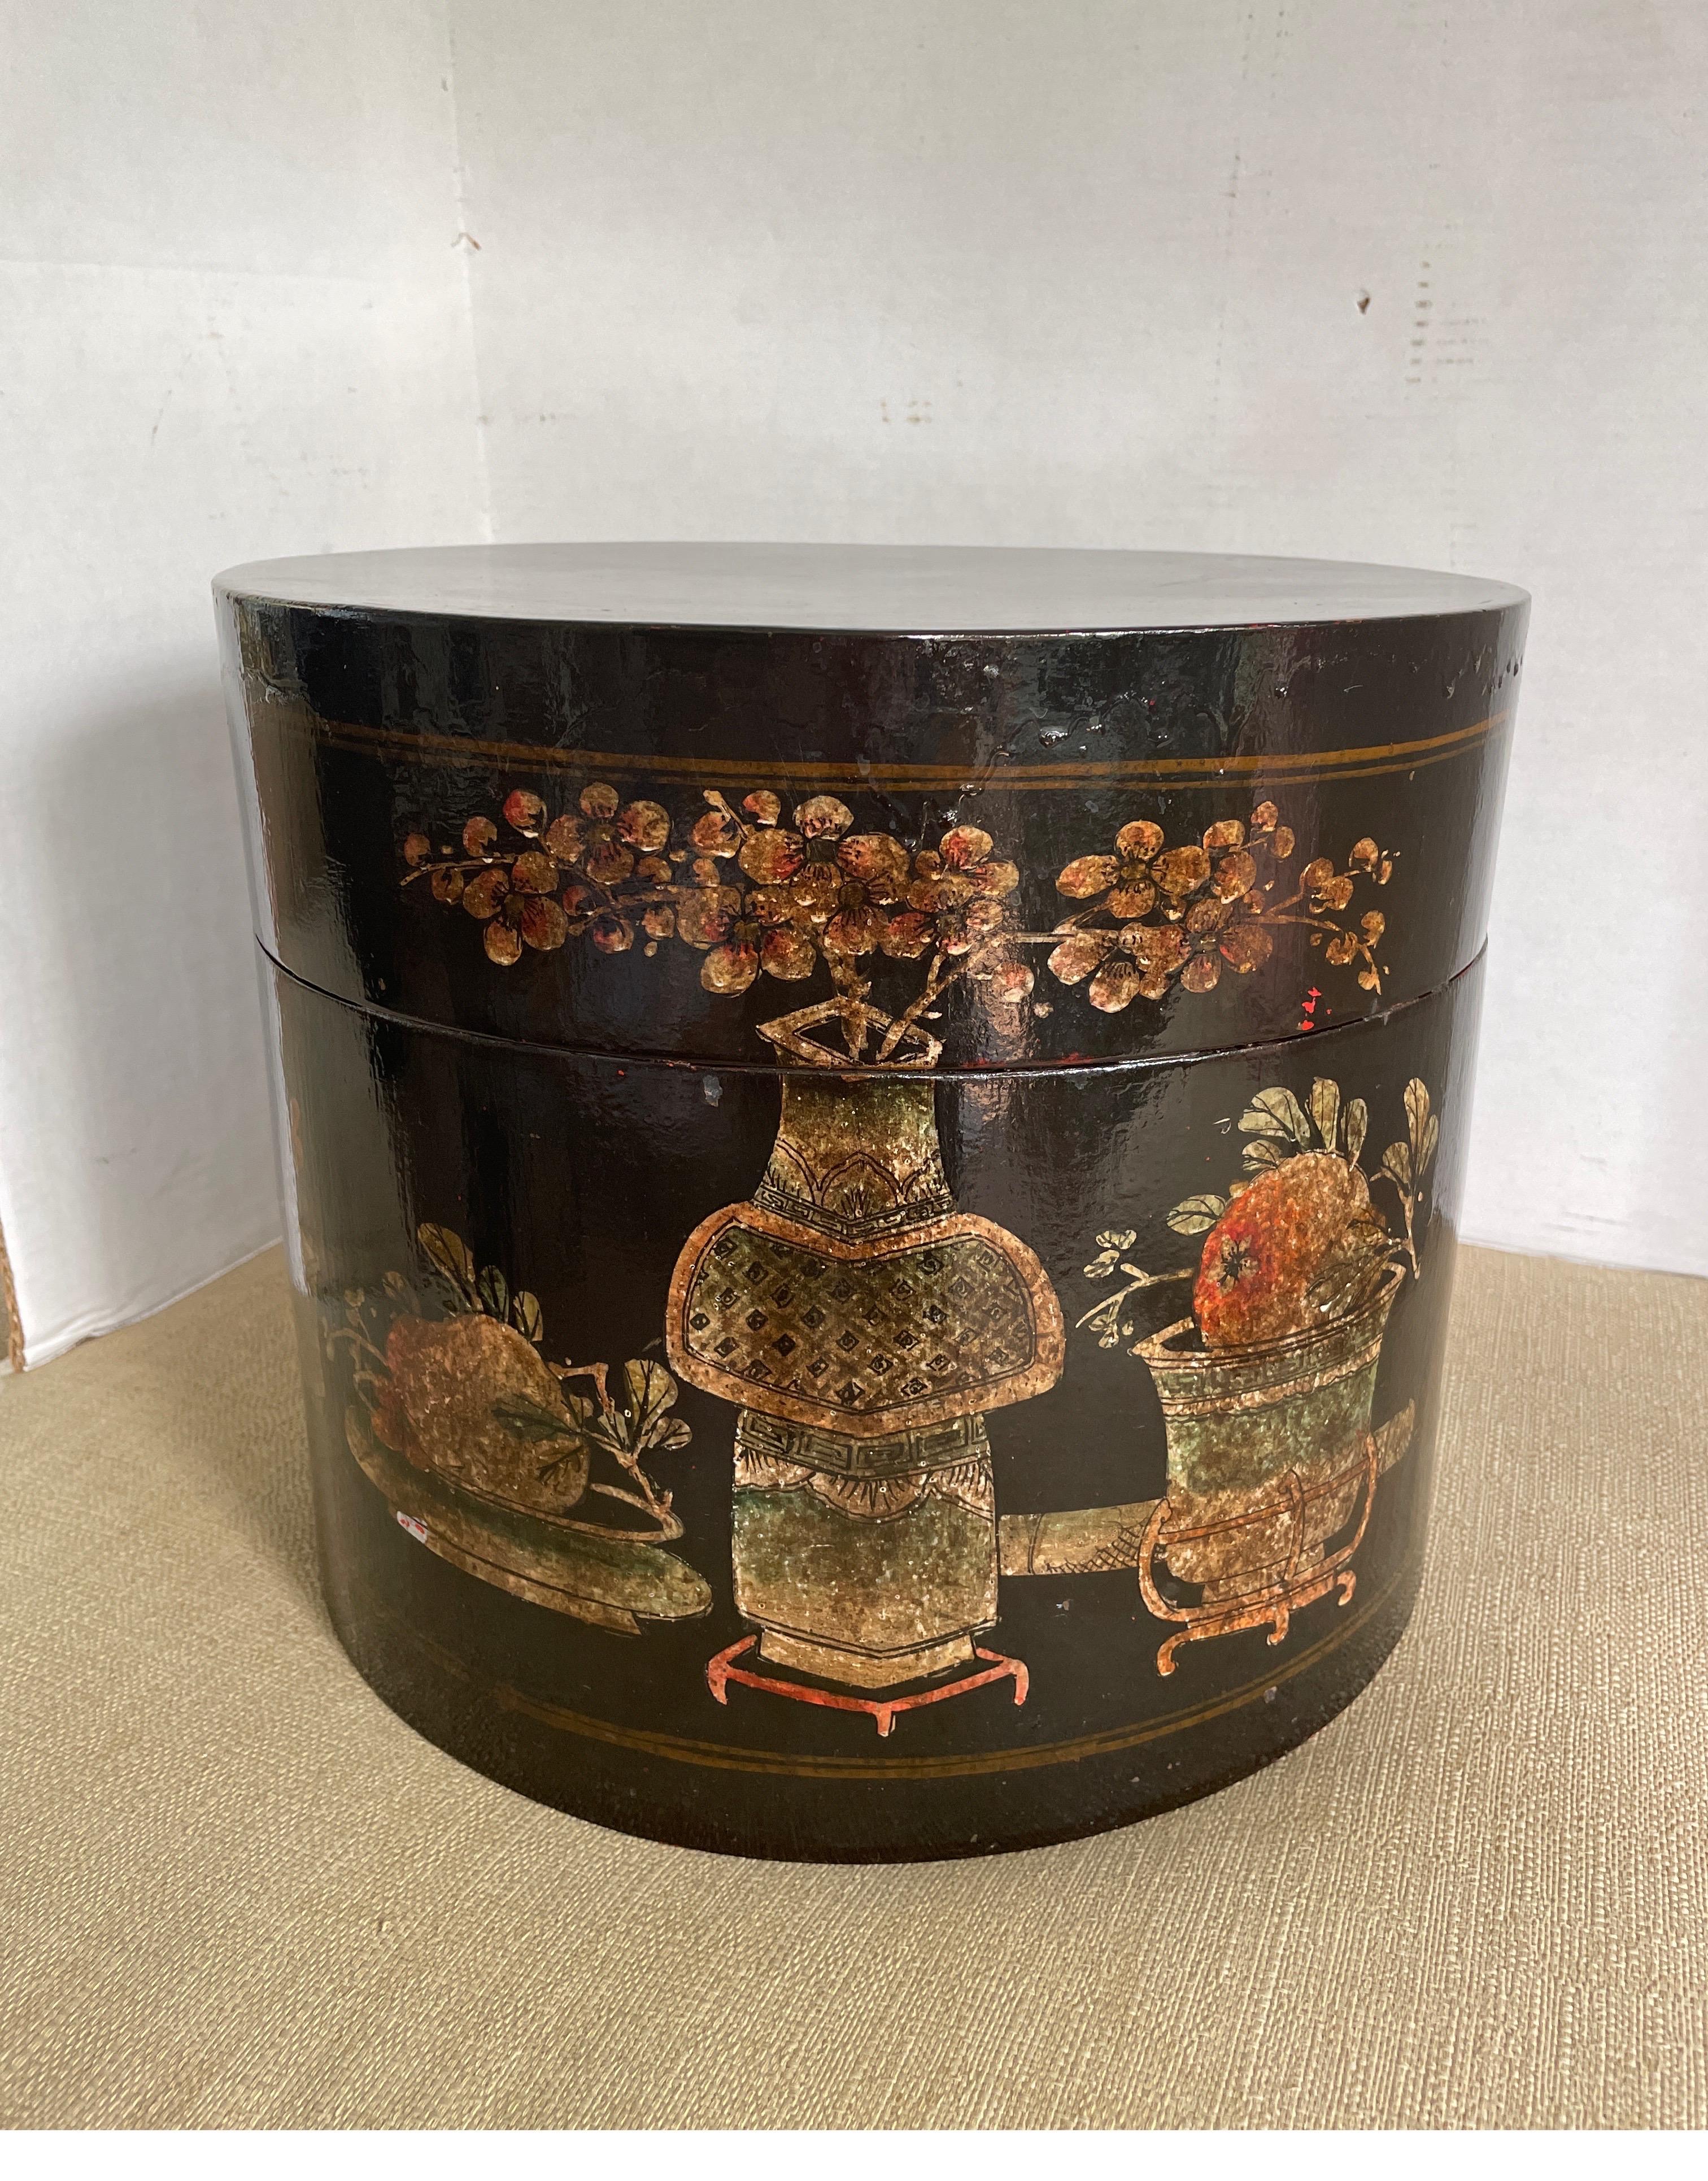 Antique Black Lacquer Round Container with Painted Floral Motifs For Sale 1